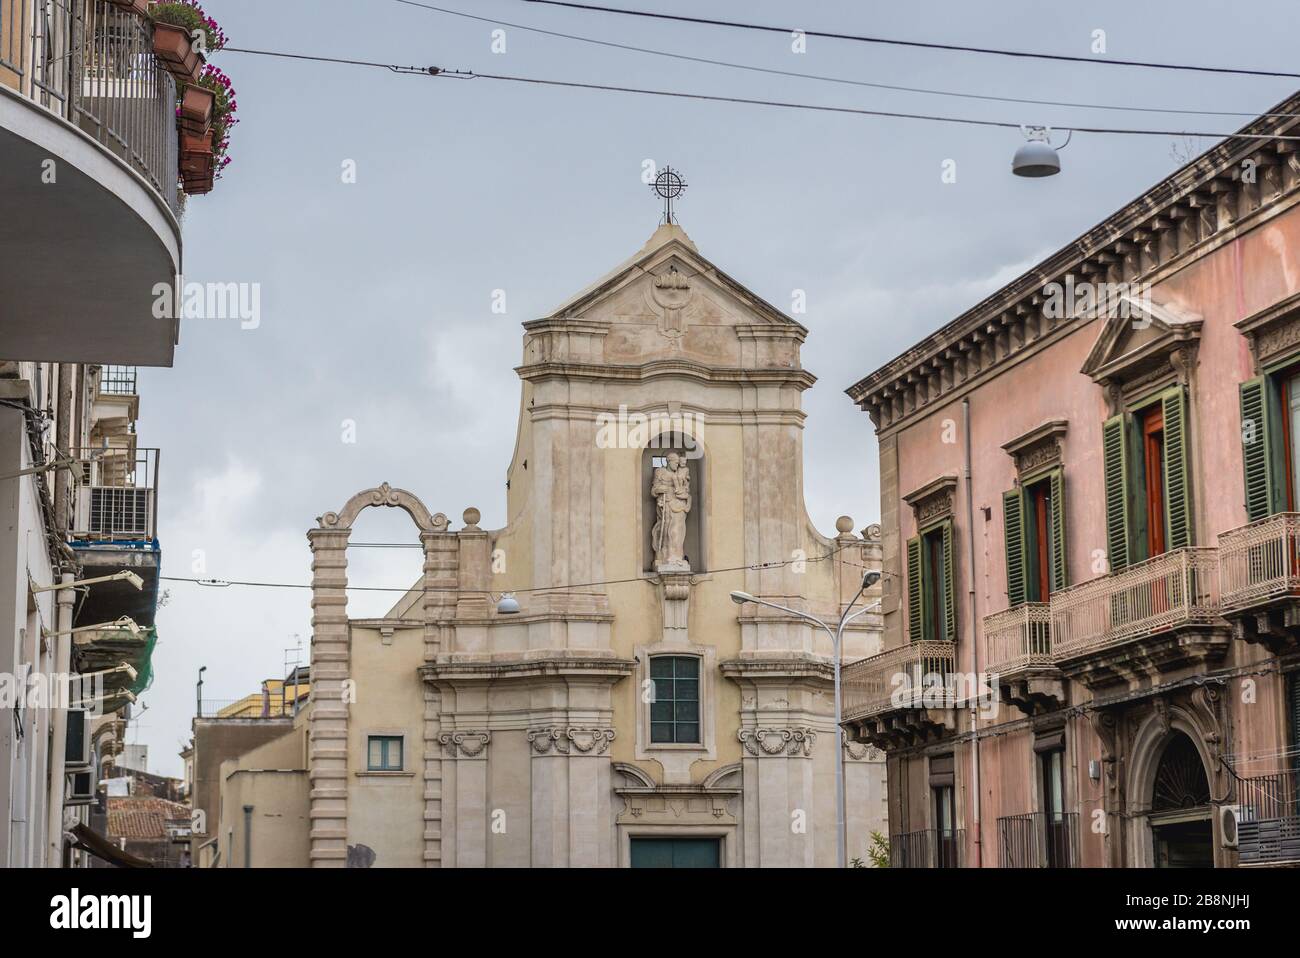 Church of San Giuseppe al Transito in Catania, second largest city of Sicily island in Italy Stock Photo